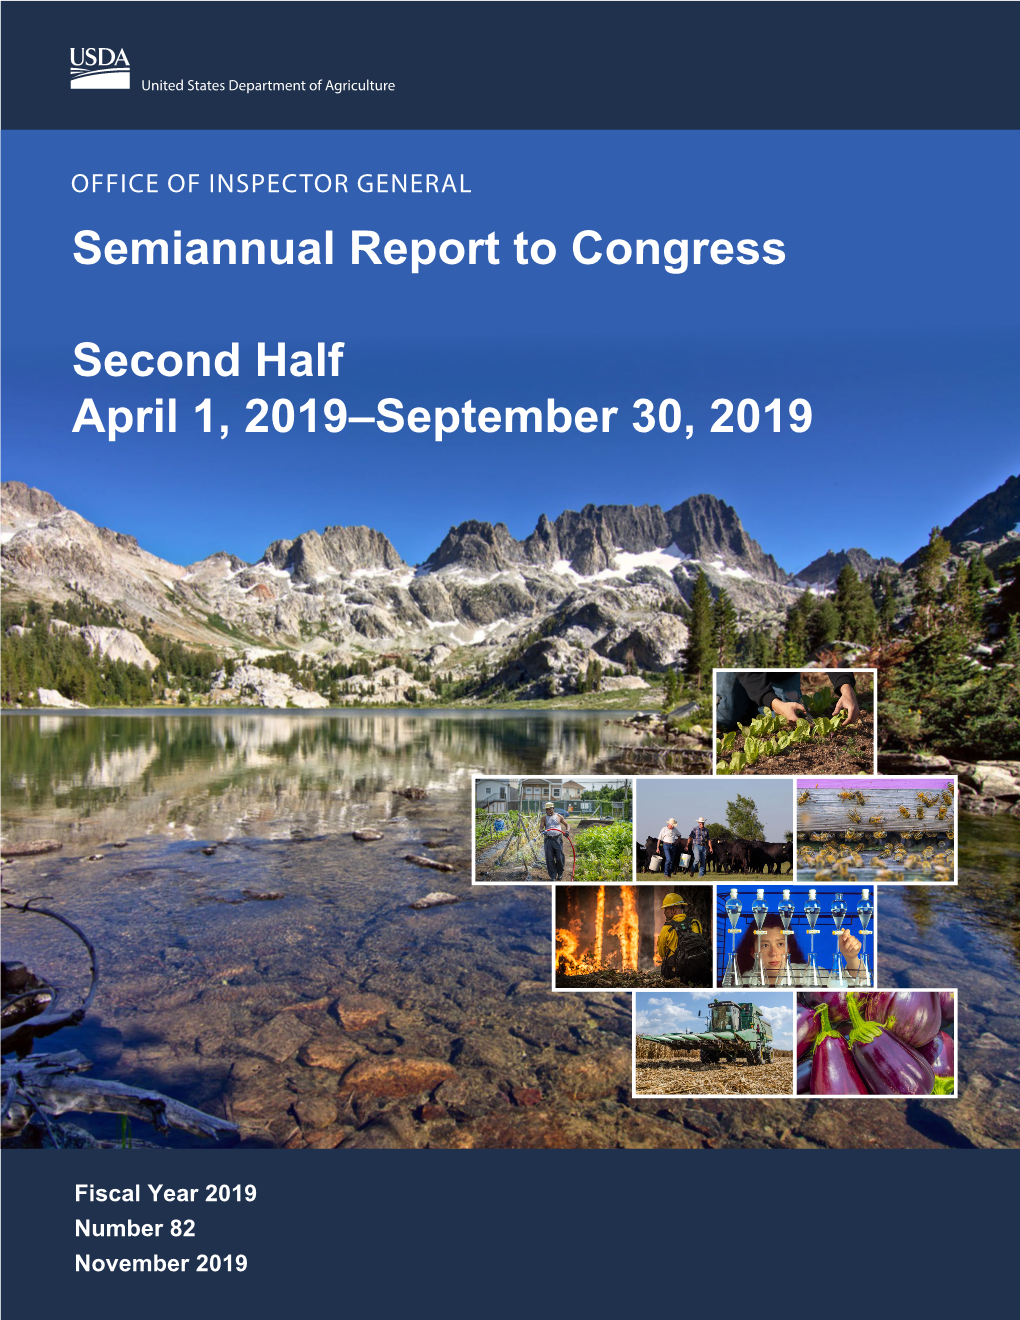 Office of Inspector General Semiannual Report to Congress FY